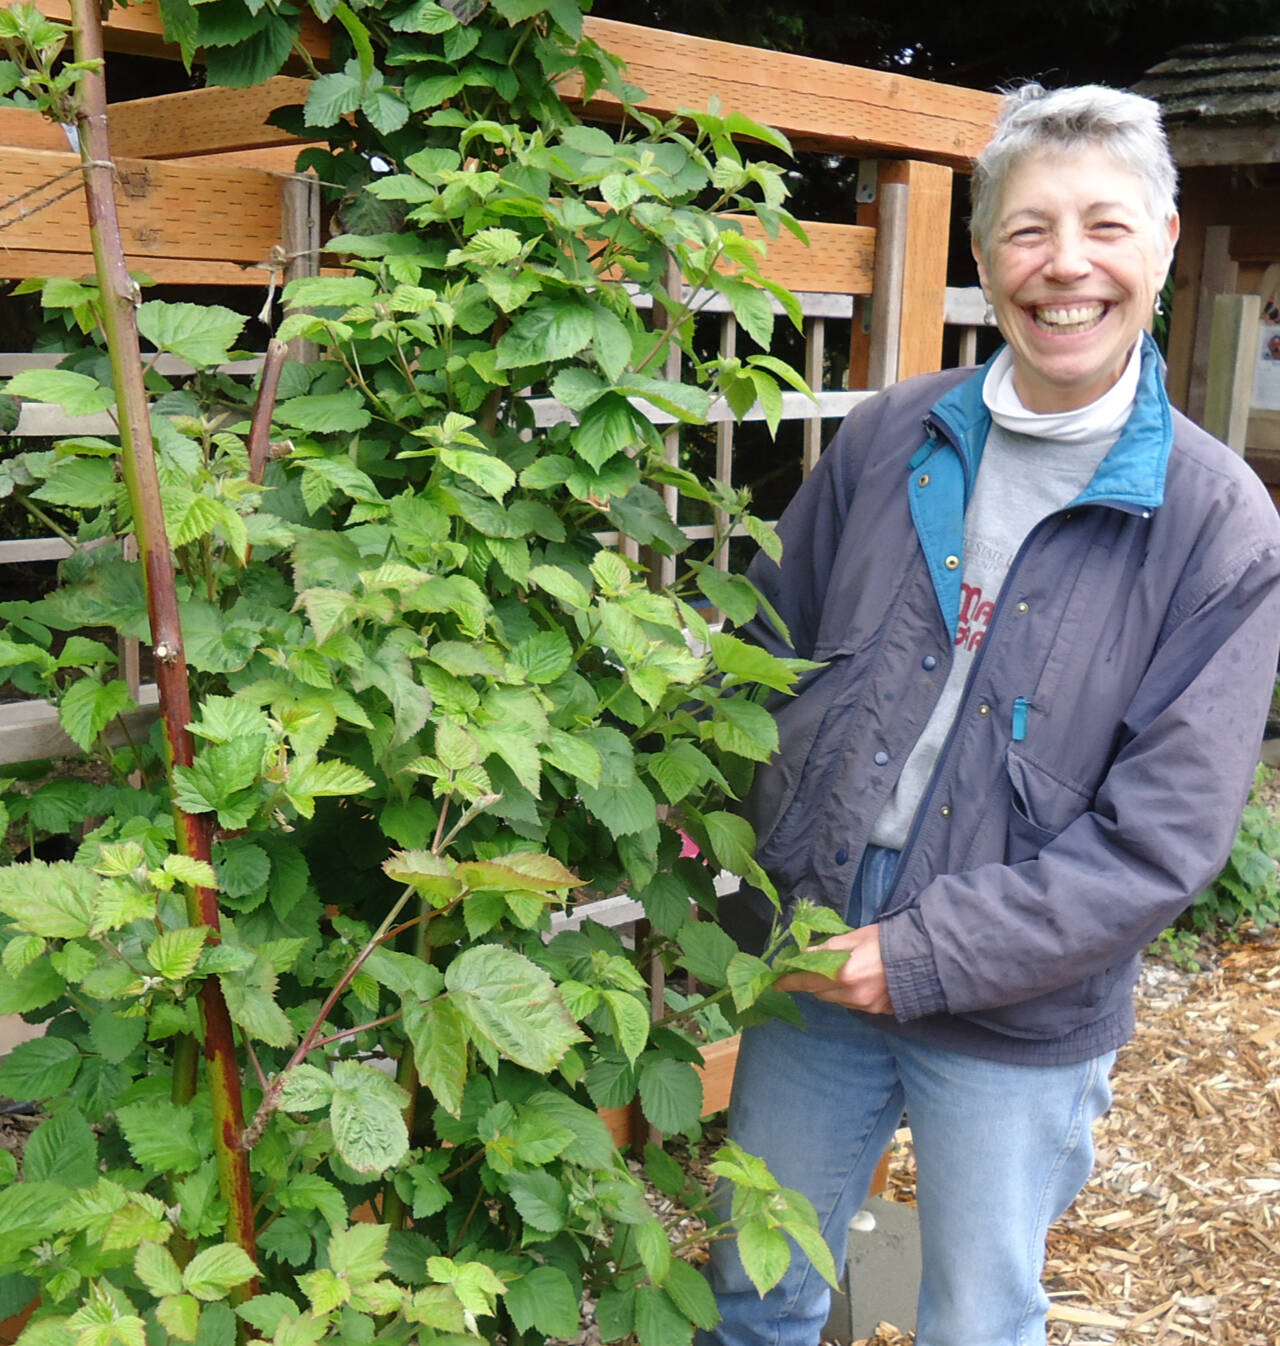 Submitted photo
Clallam County Master Gardener Jeanette Stehr-Green will teach local gardeners about selecting, planting, and caring for raspberries and blackberries from 10:30 a.m.-noon on Saturday, June 18, at the Master Gardener Demonstration Garden at 2711 Woodcock Road, in Sequim.